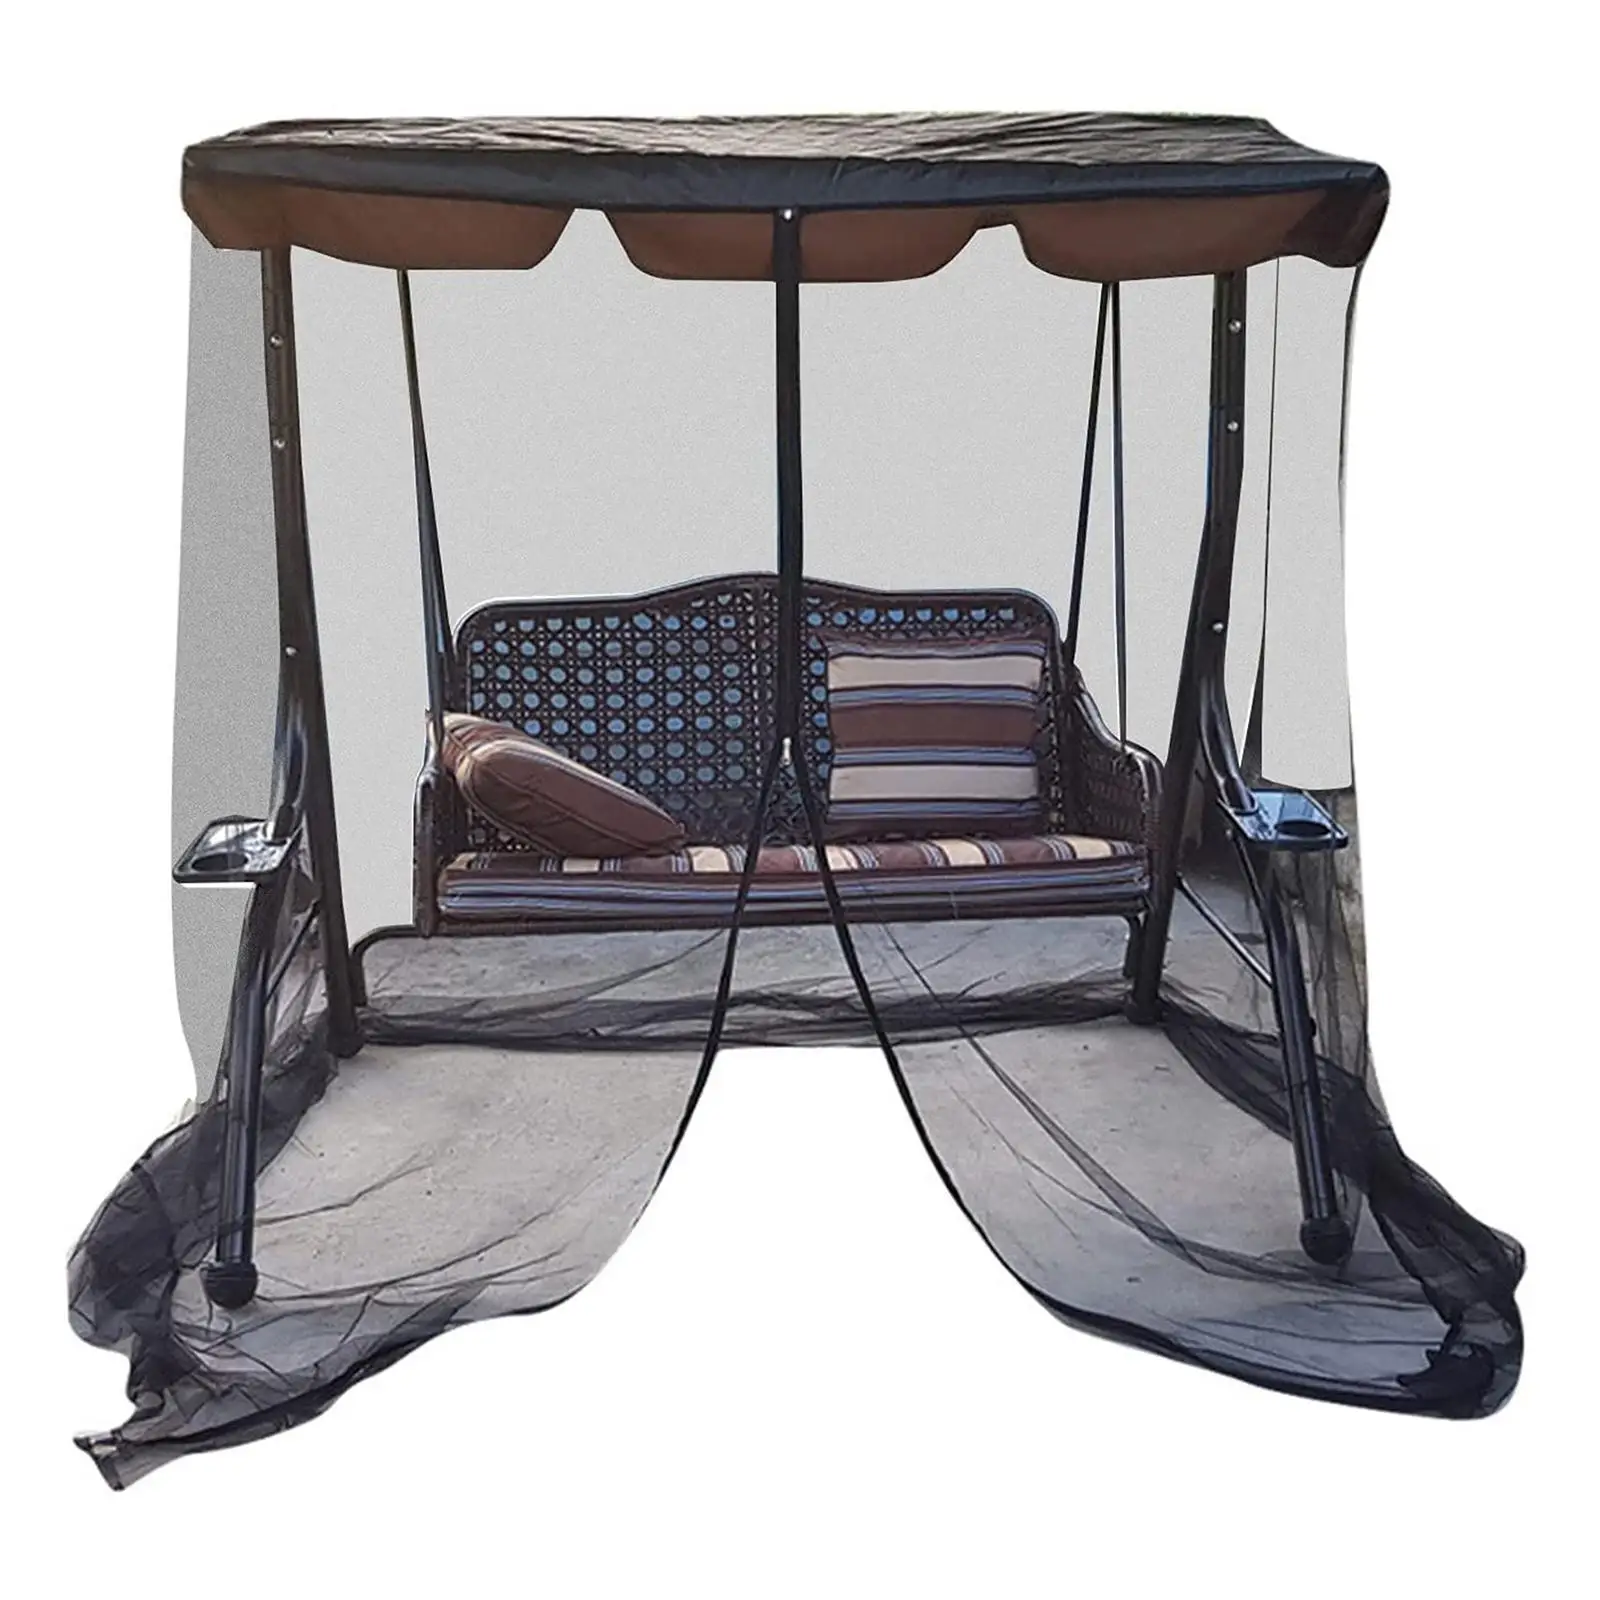 Patio Swing Chair Cover Mosquito Netting Screen For Patio Table Umbrella Garden Deck Furniture Zippered Mesh Enclosure Cover